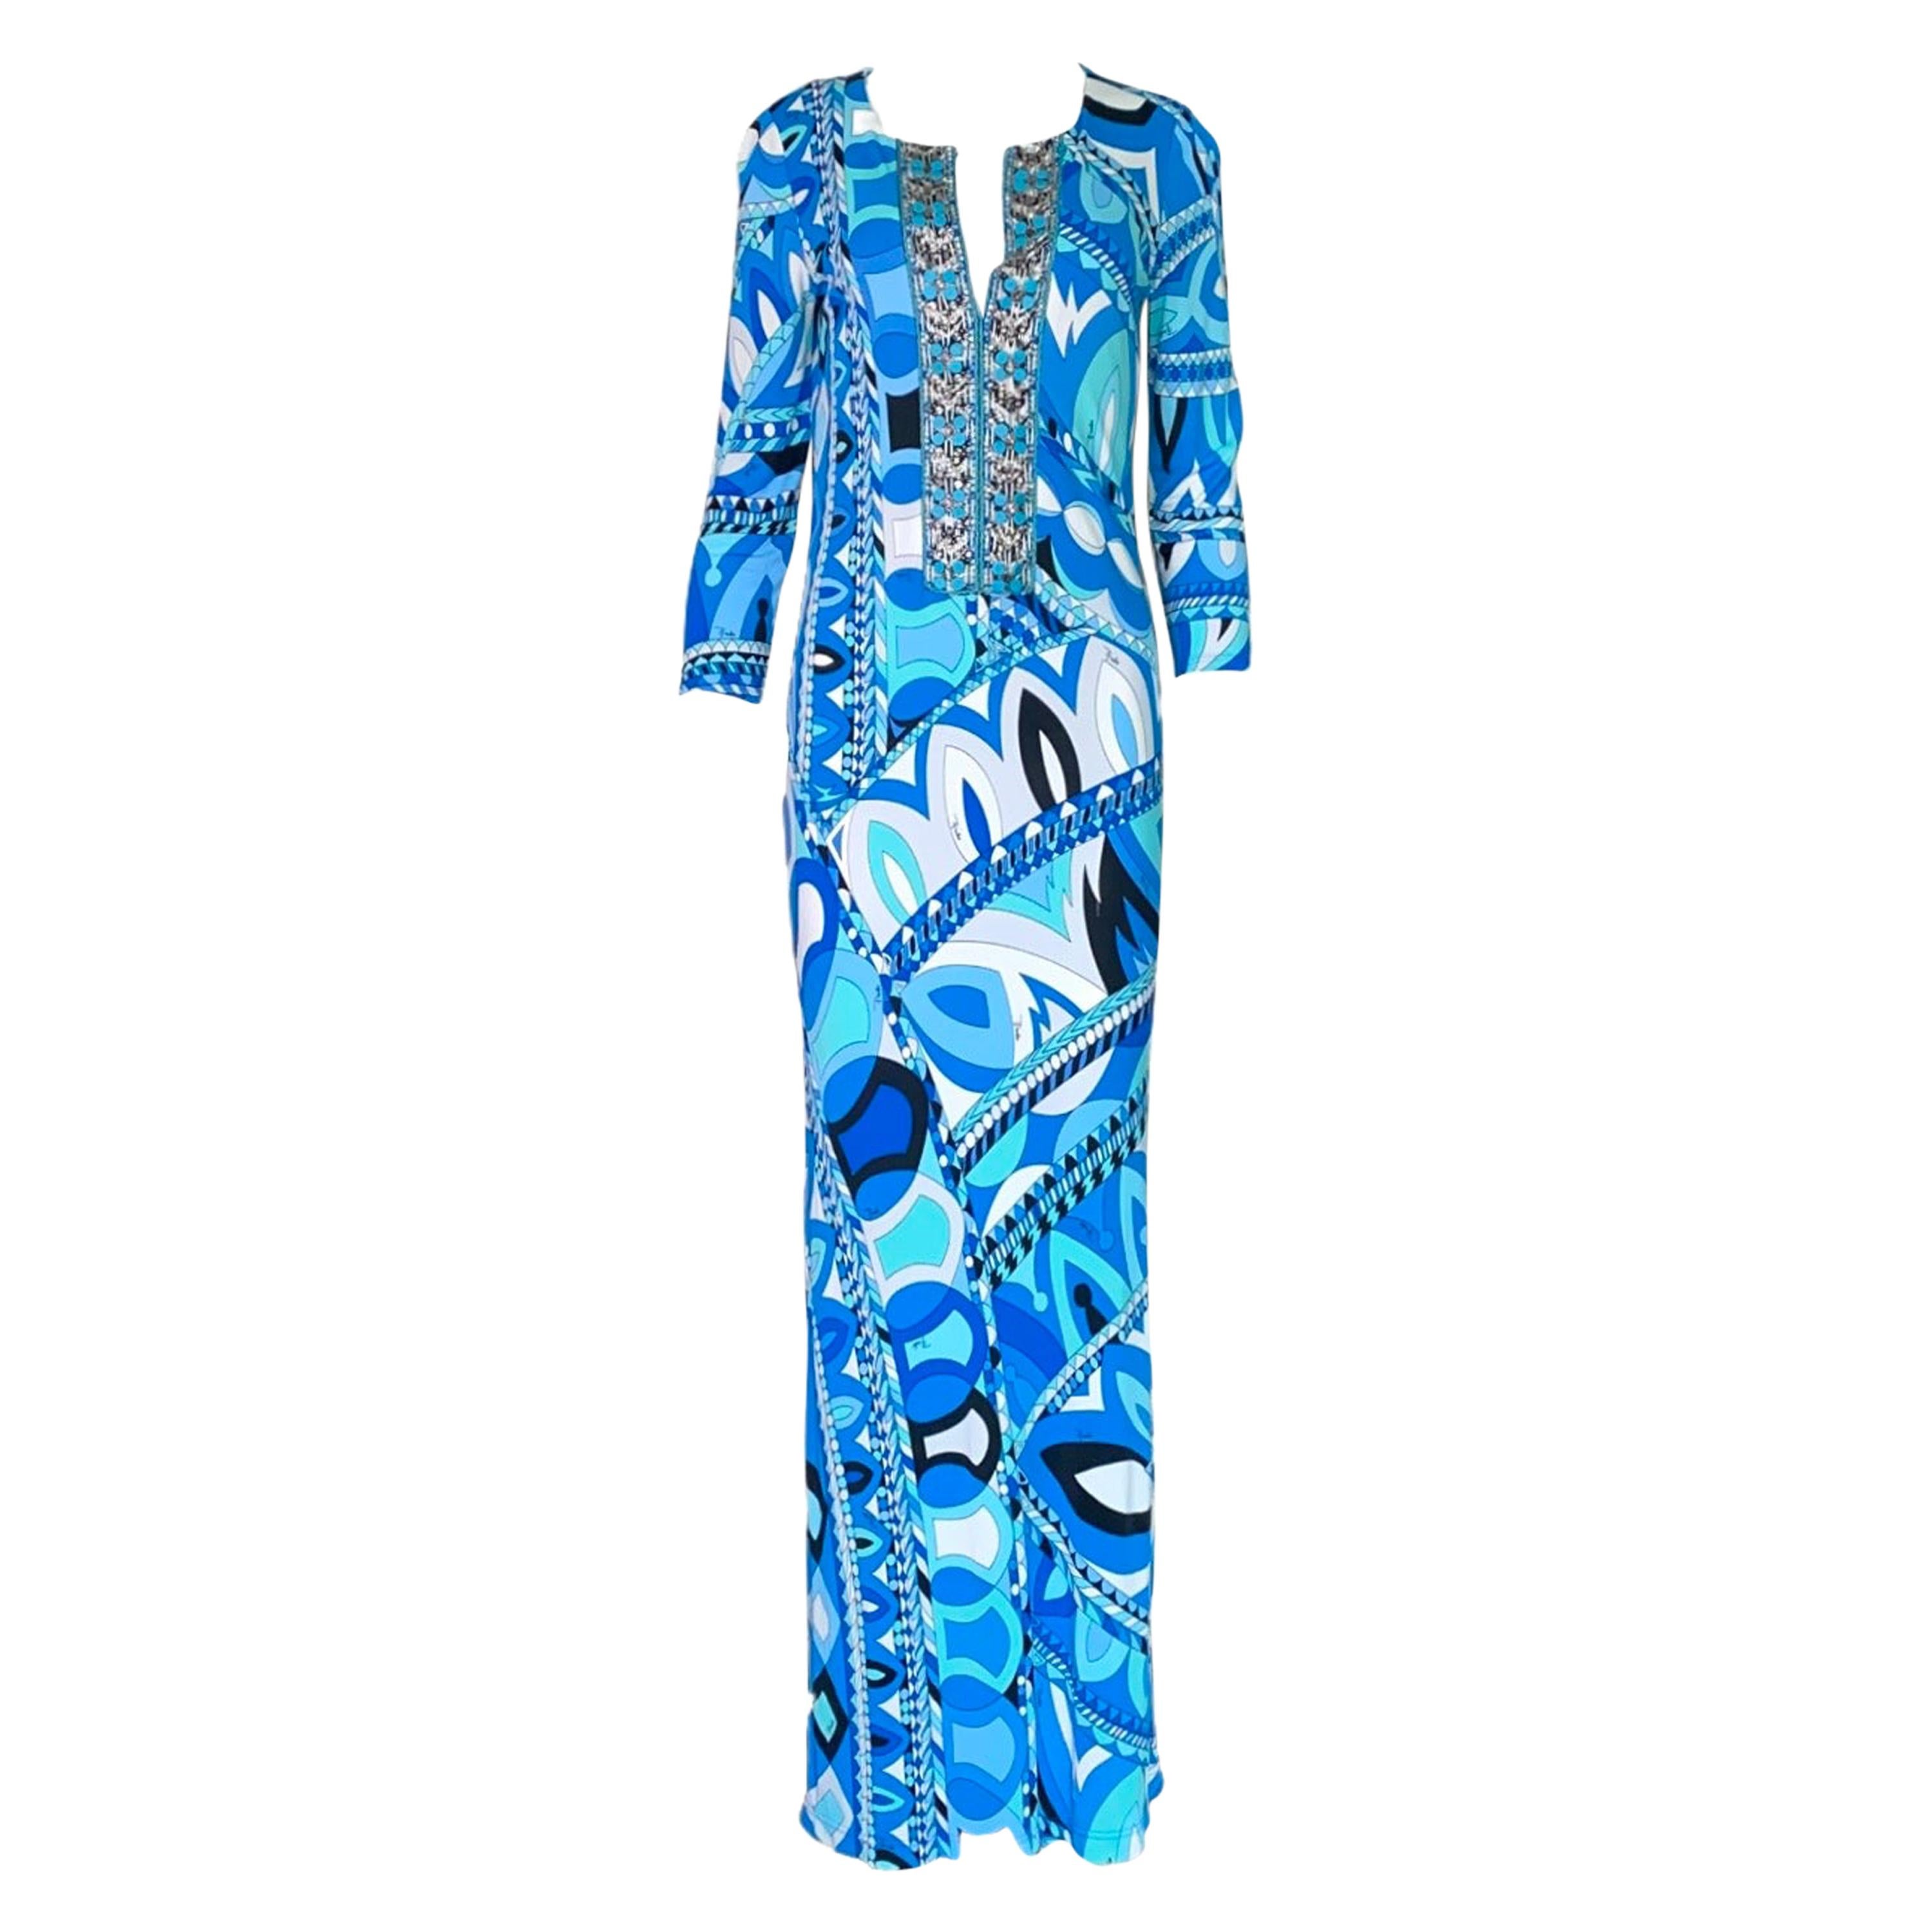 NEW Emilio Pucci Embroidered Signature Print Embellished Tunic Maxi Dress Gown